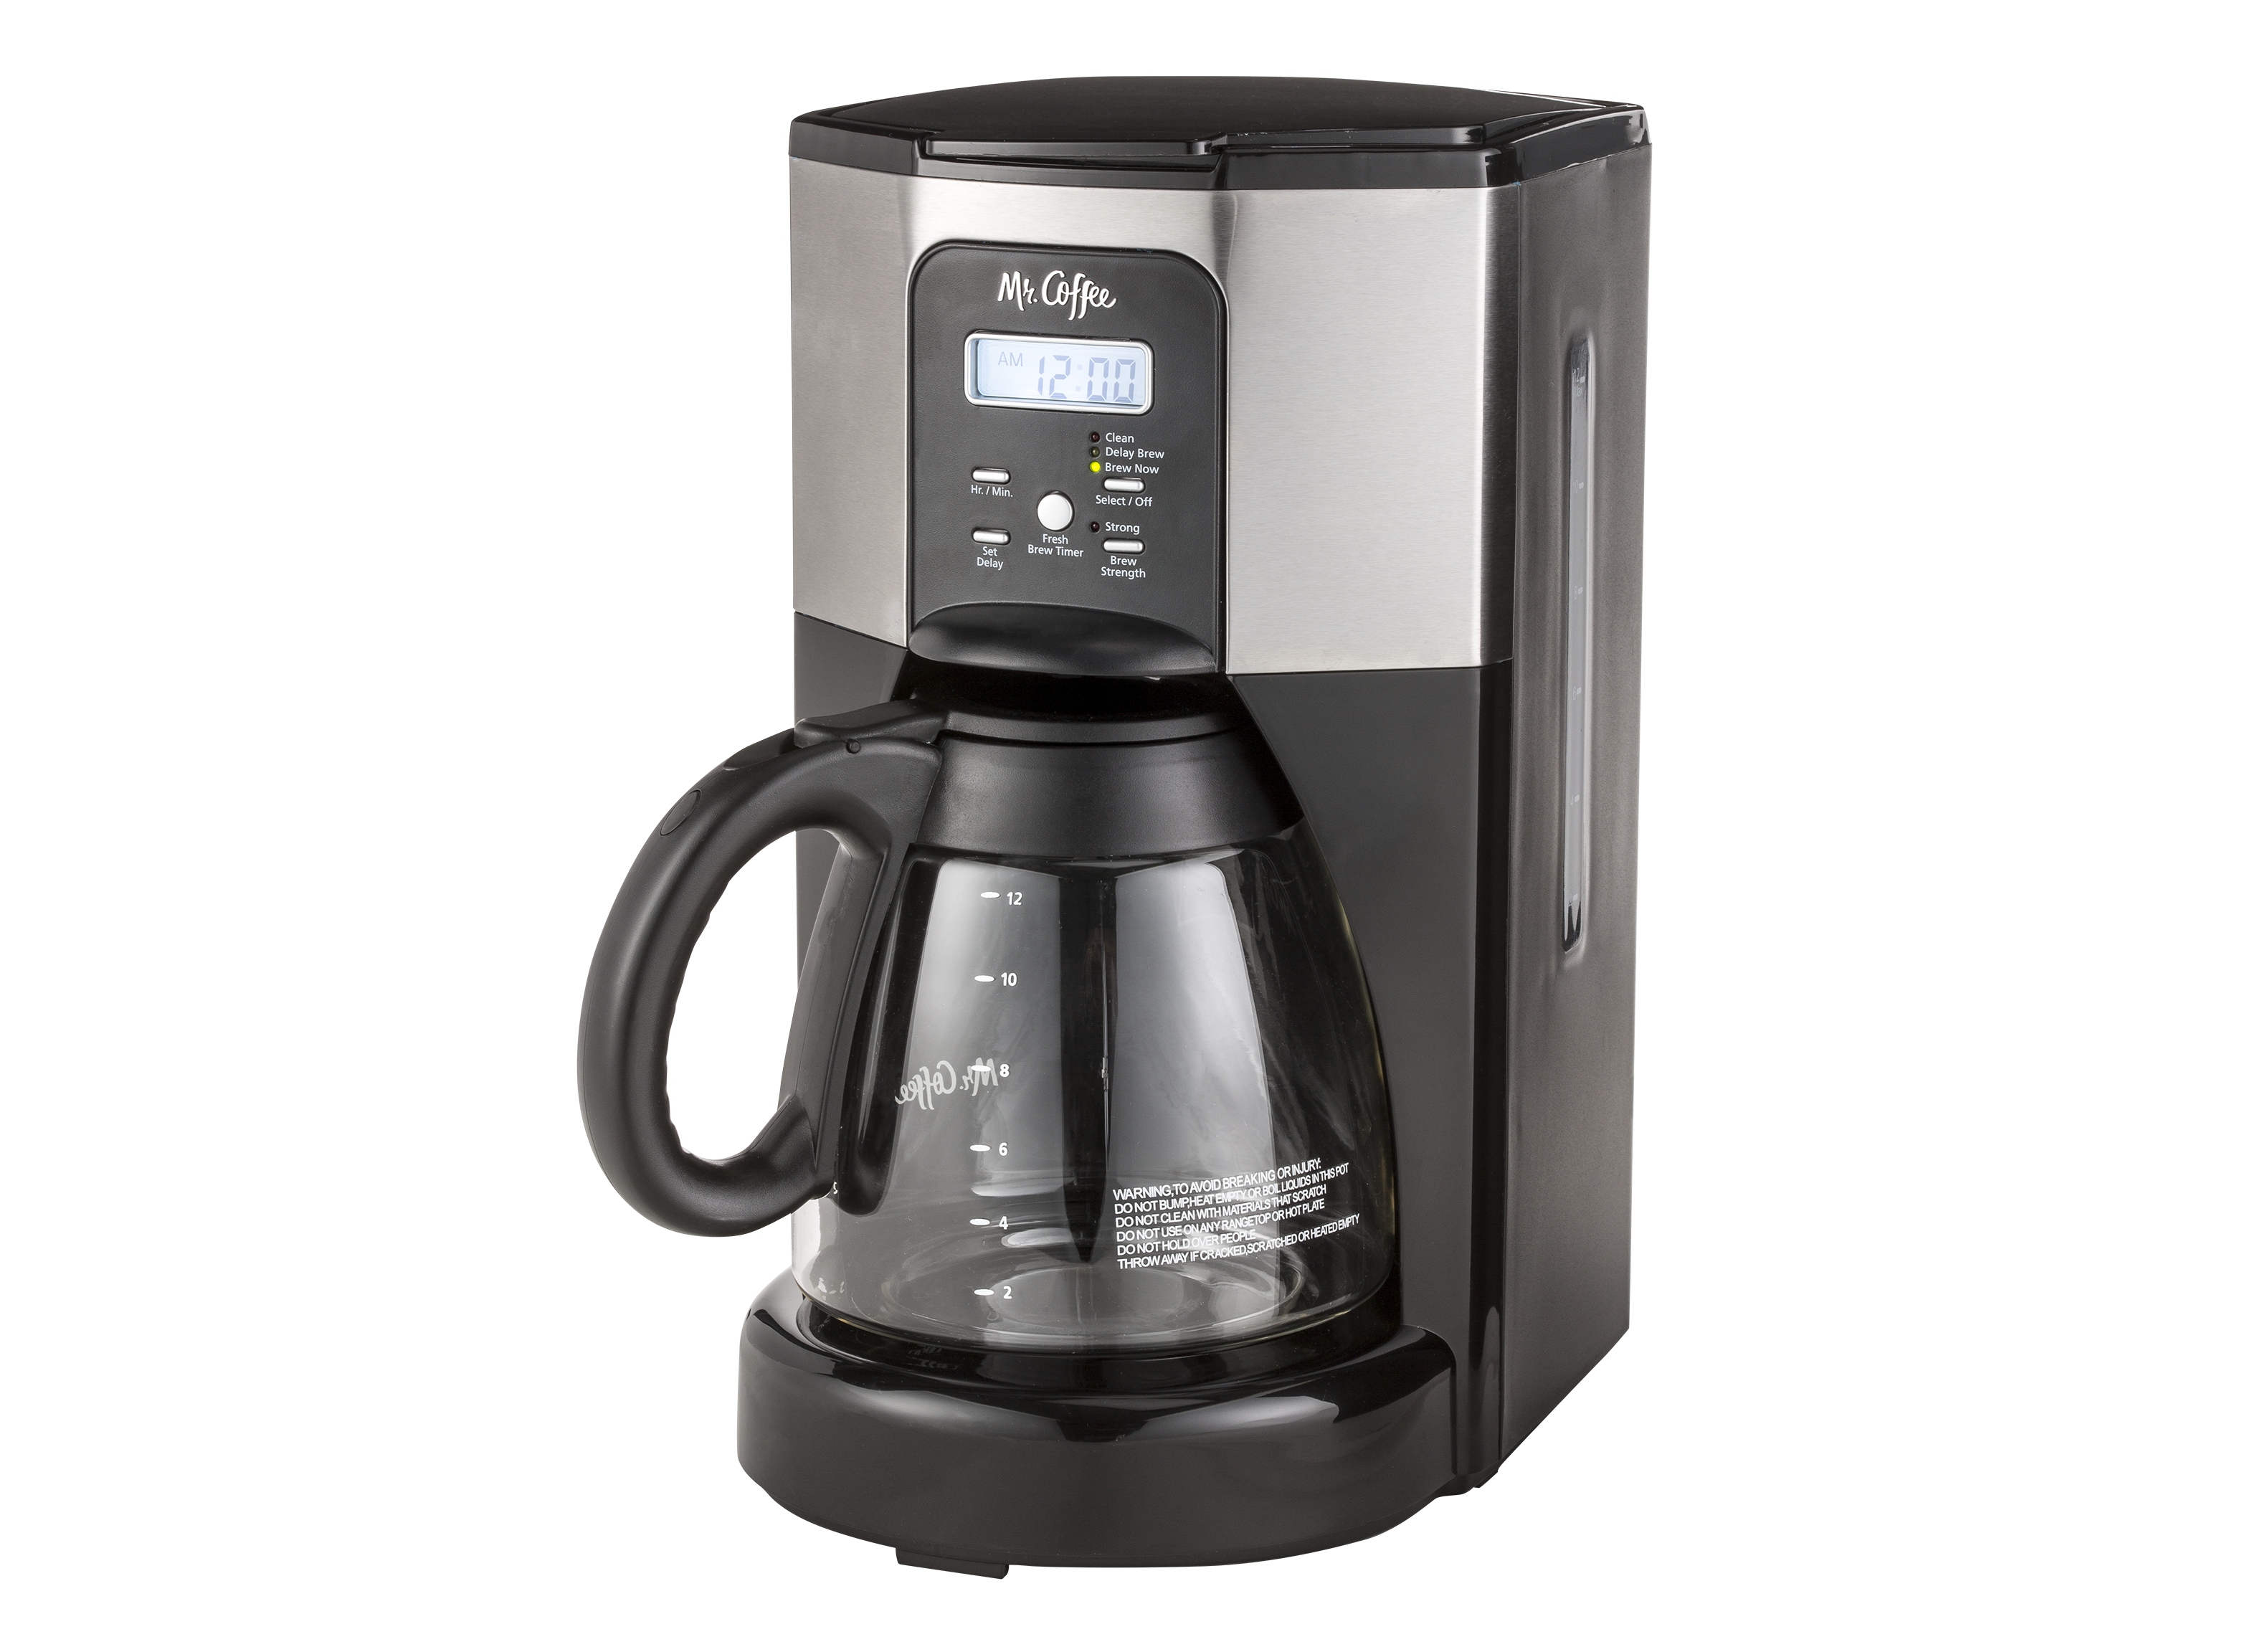 https://crdms.images.consumerreports.org/prod/products/cr/models/386197-coffeemakers-mrcoffee-bvmcecx41cpcostcoexclusive.png